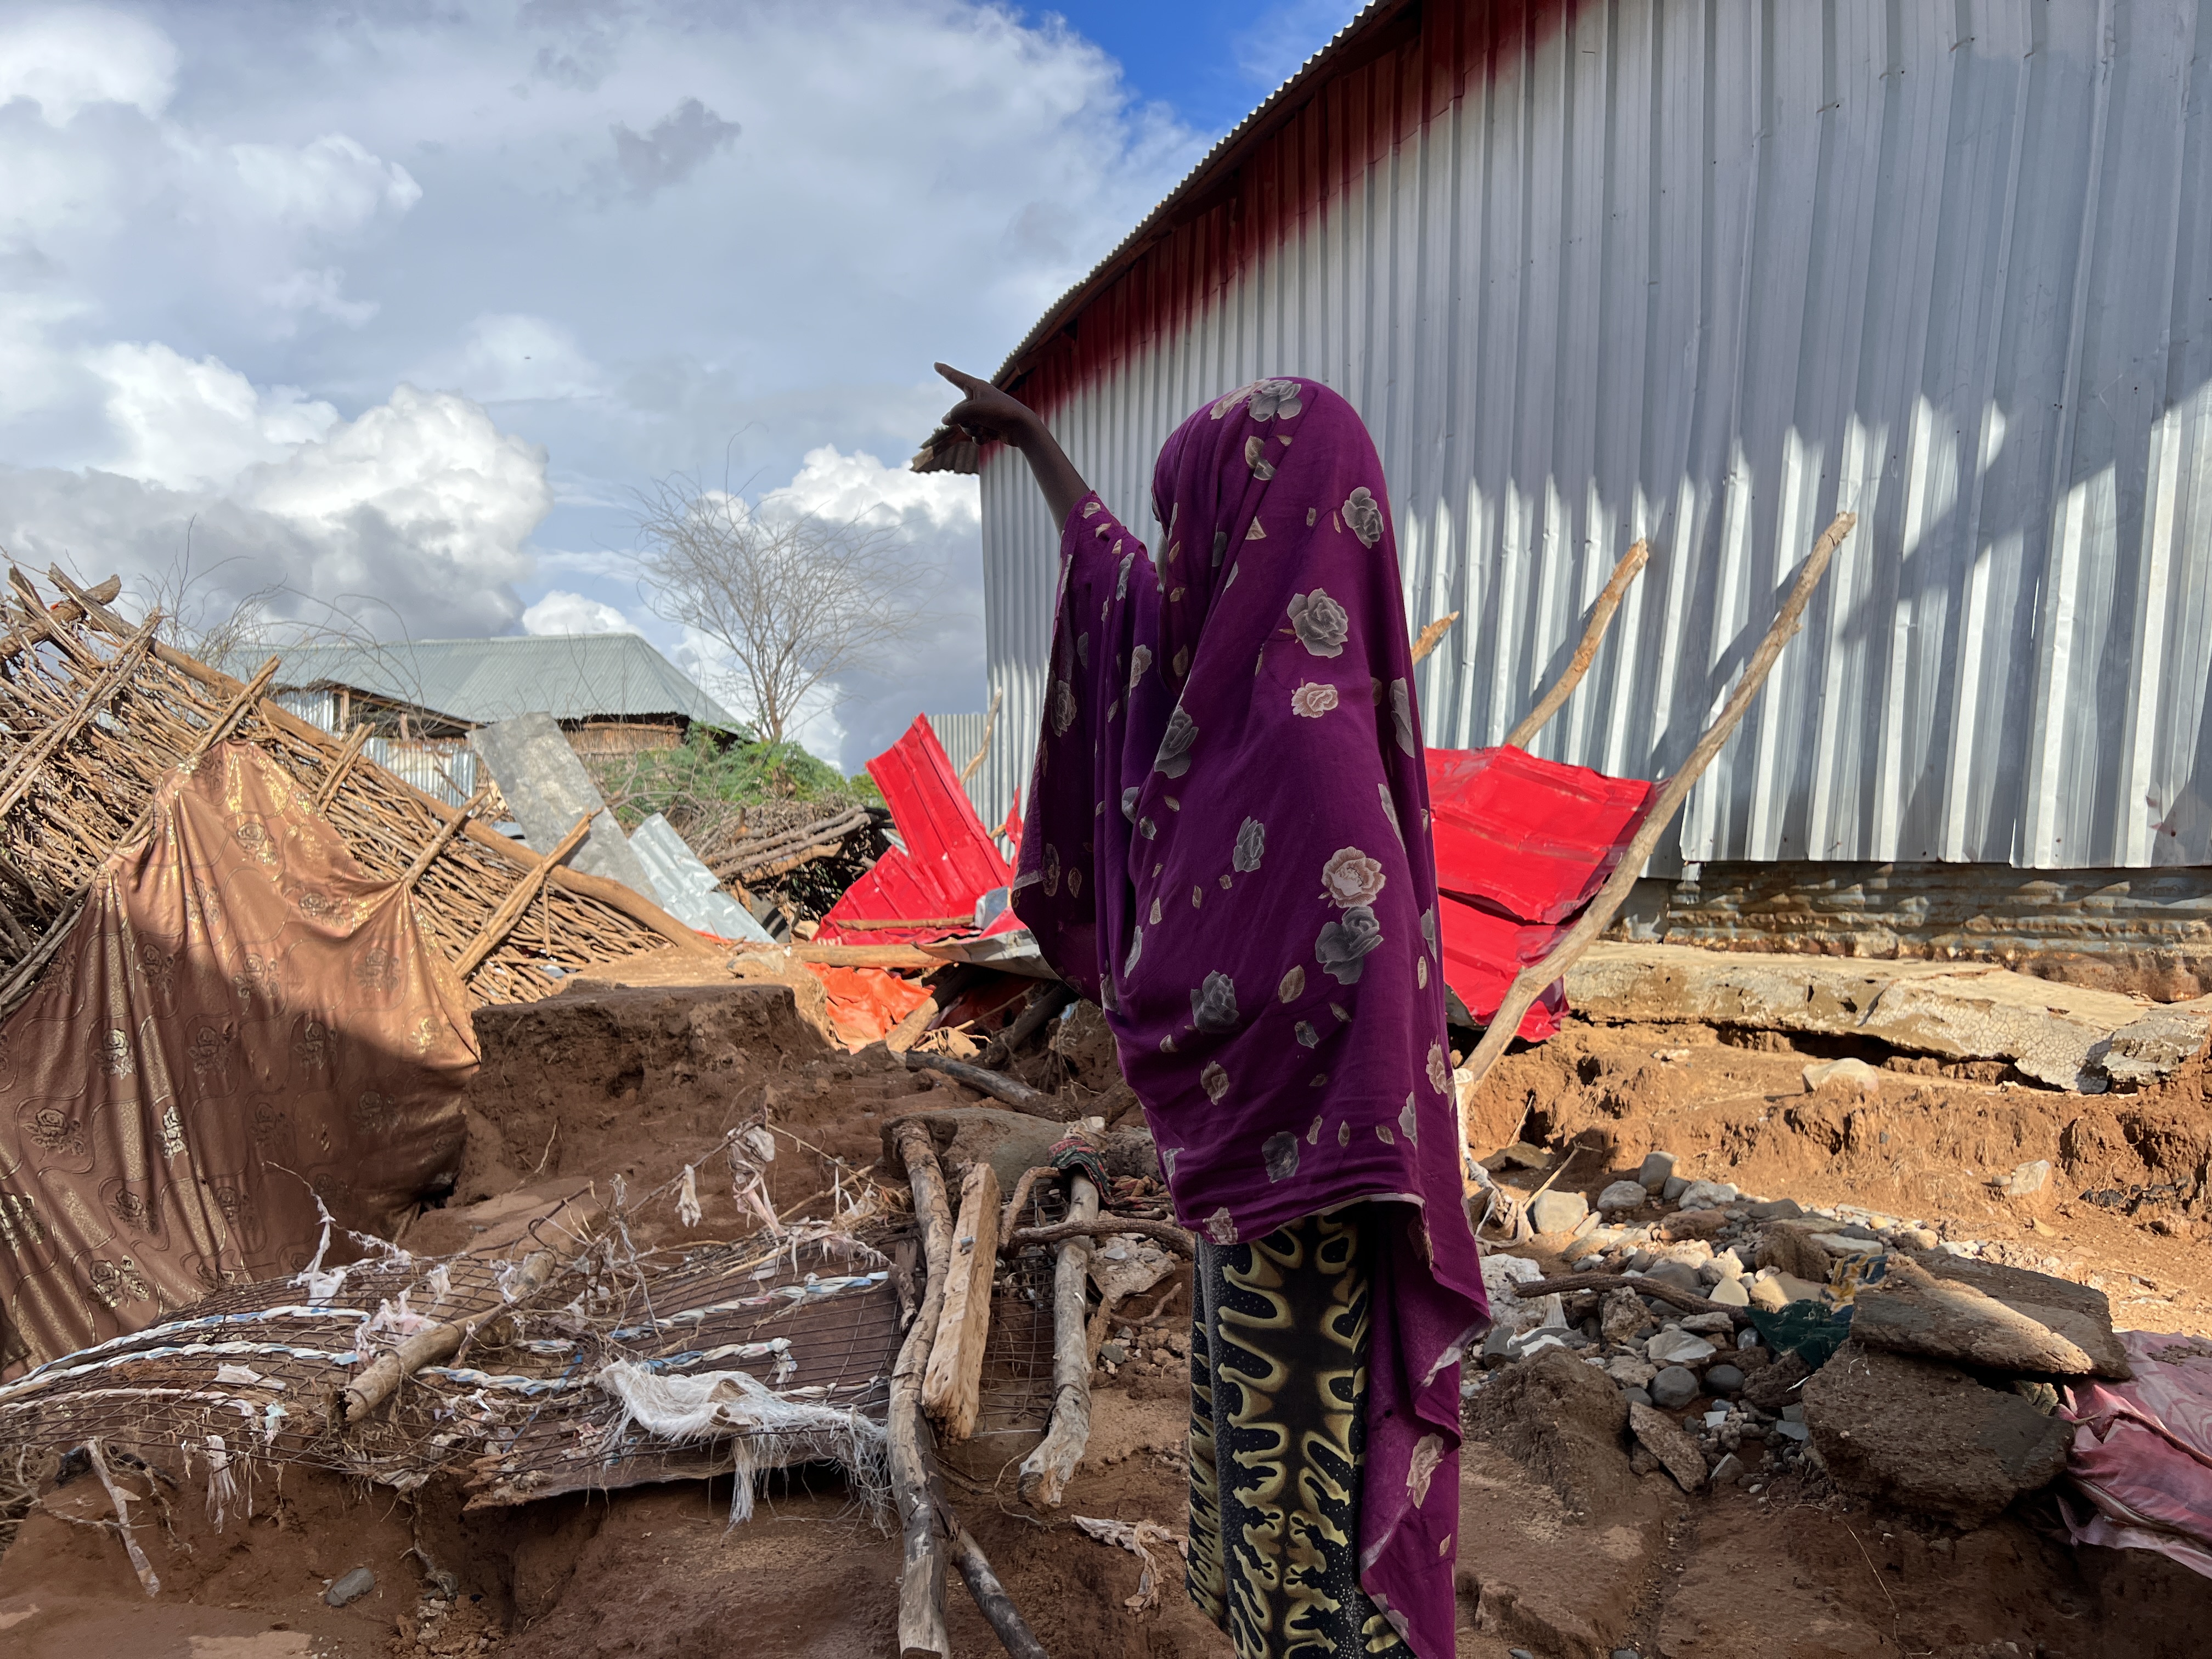 A girl in Luuq district points towards the direction of their house that was completely destroyed by the floods